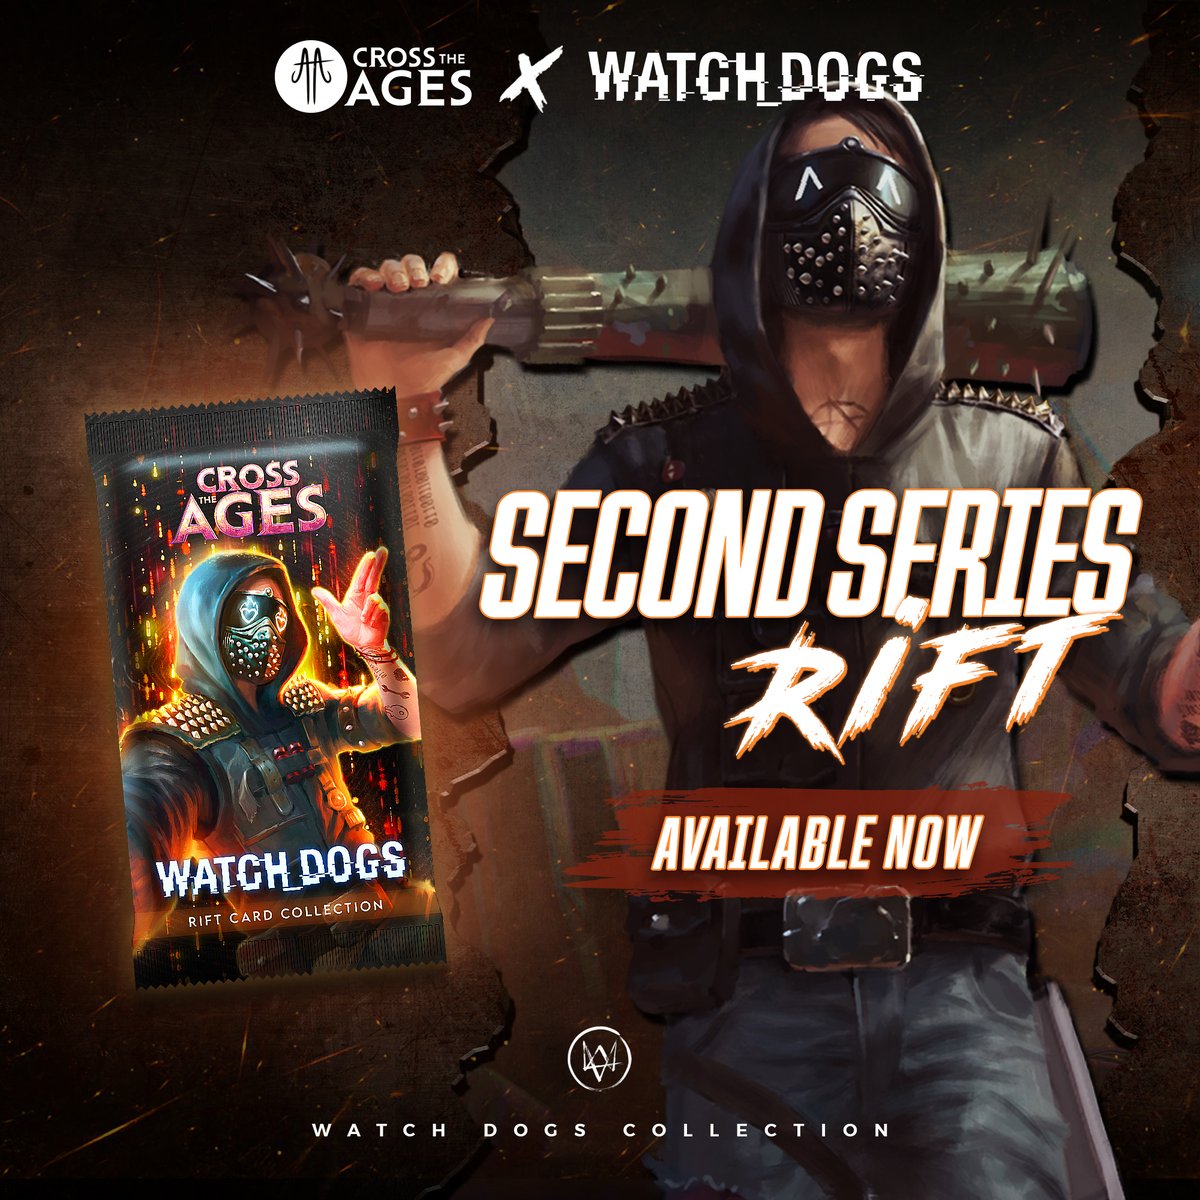 Here it is! 🎉 The second CTA x WatchDogs series just dropped, and it's packed with excitement. Make your way to the in-game shop to team up with the iconic WatchDogs characters. They've just arrived in the Rift and are bringing a whole new level to your collection. 💫